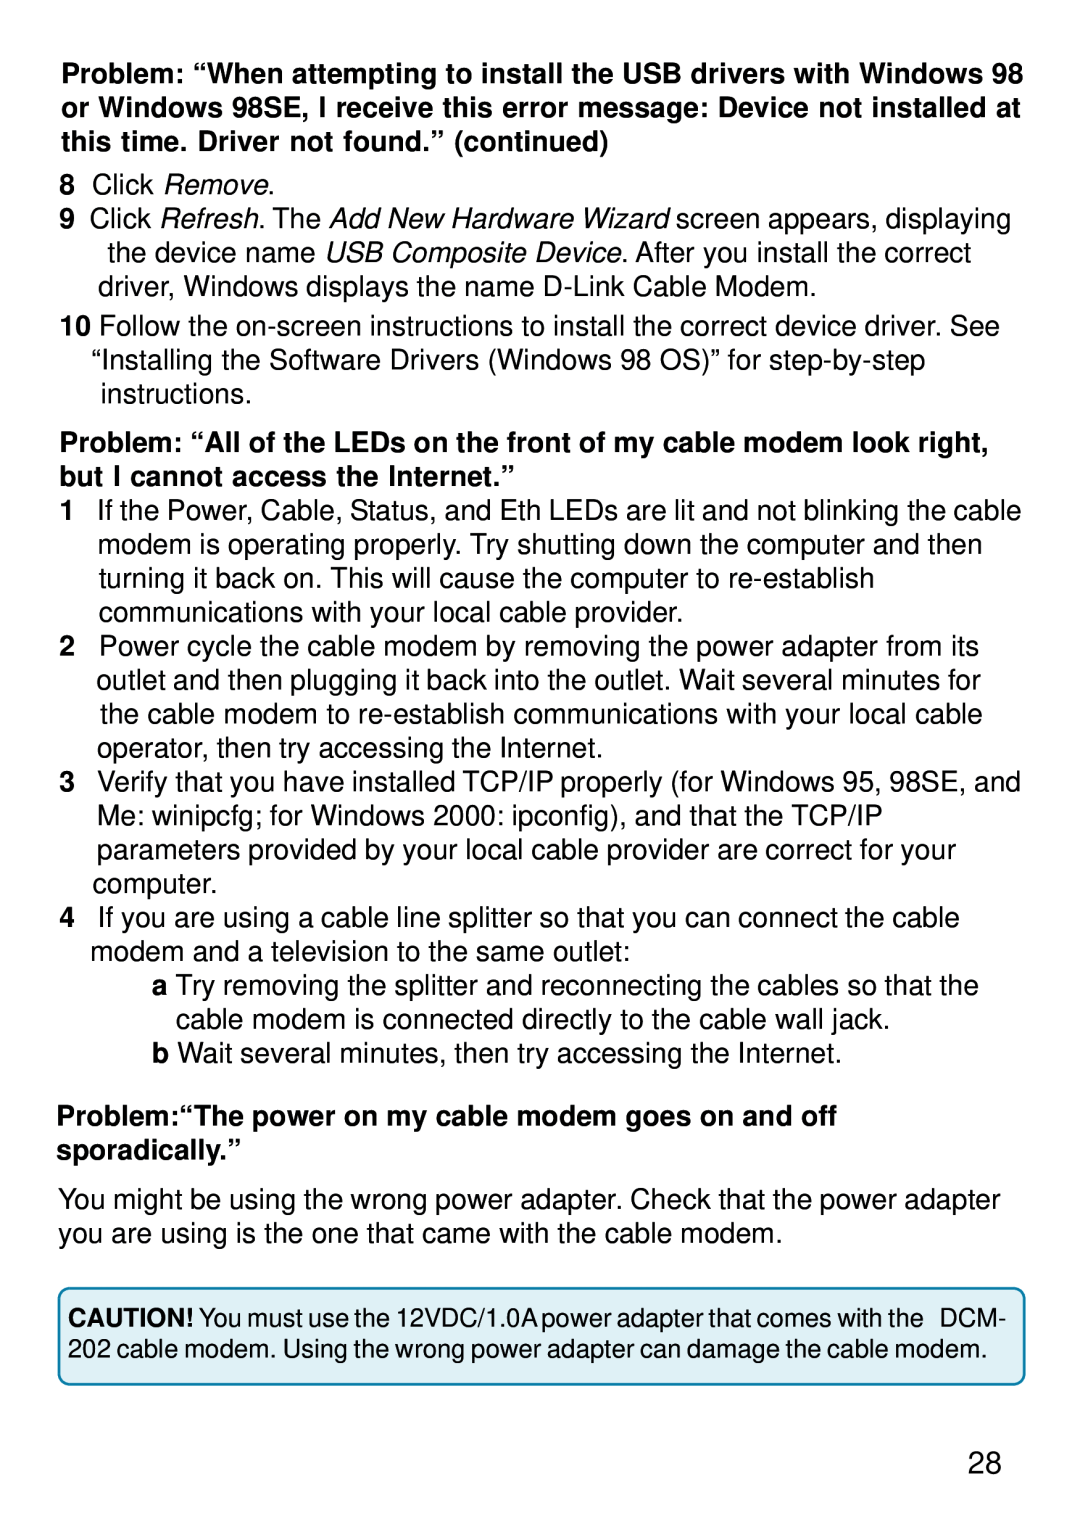 D-Link DCM-202 manual Problem “When attempting to install the USB drivers with Windows 